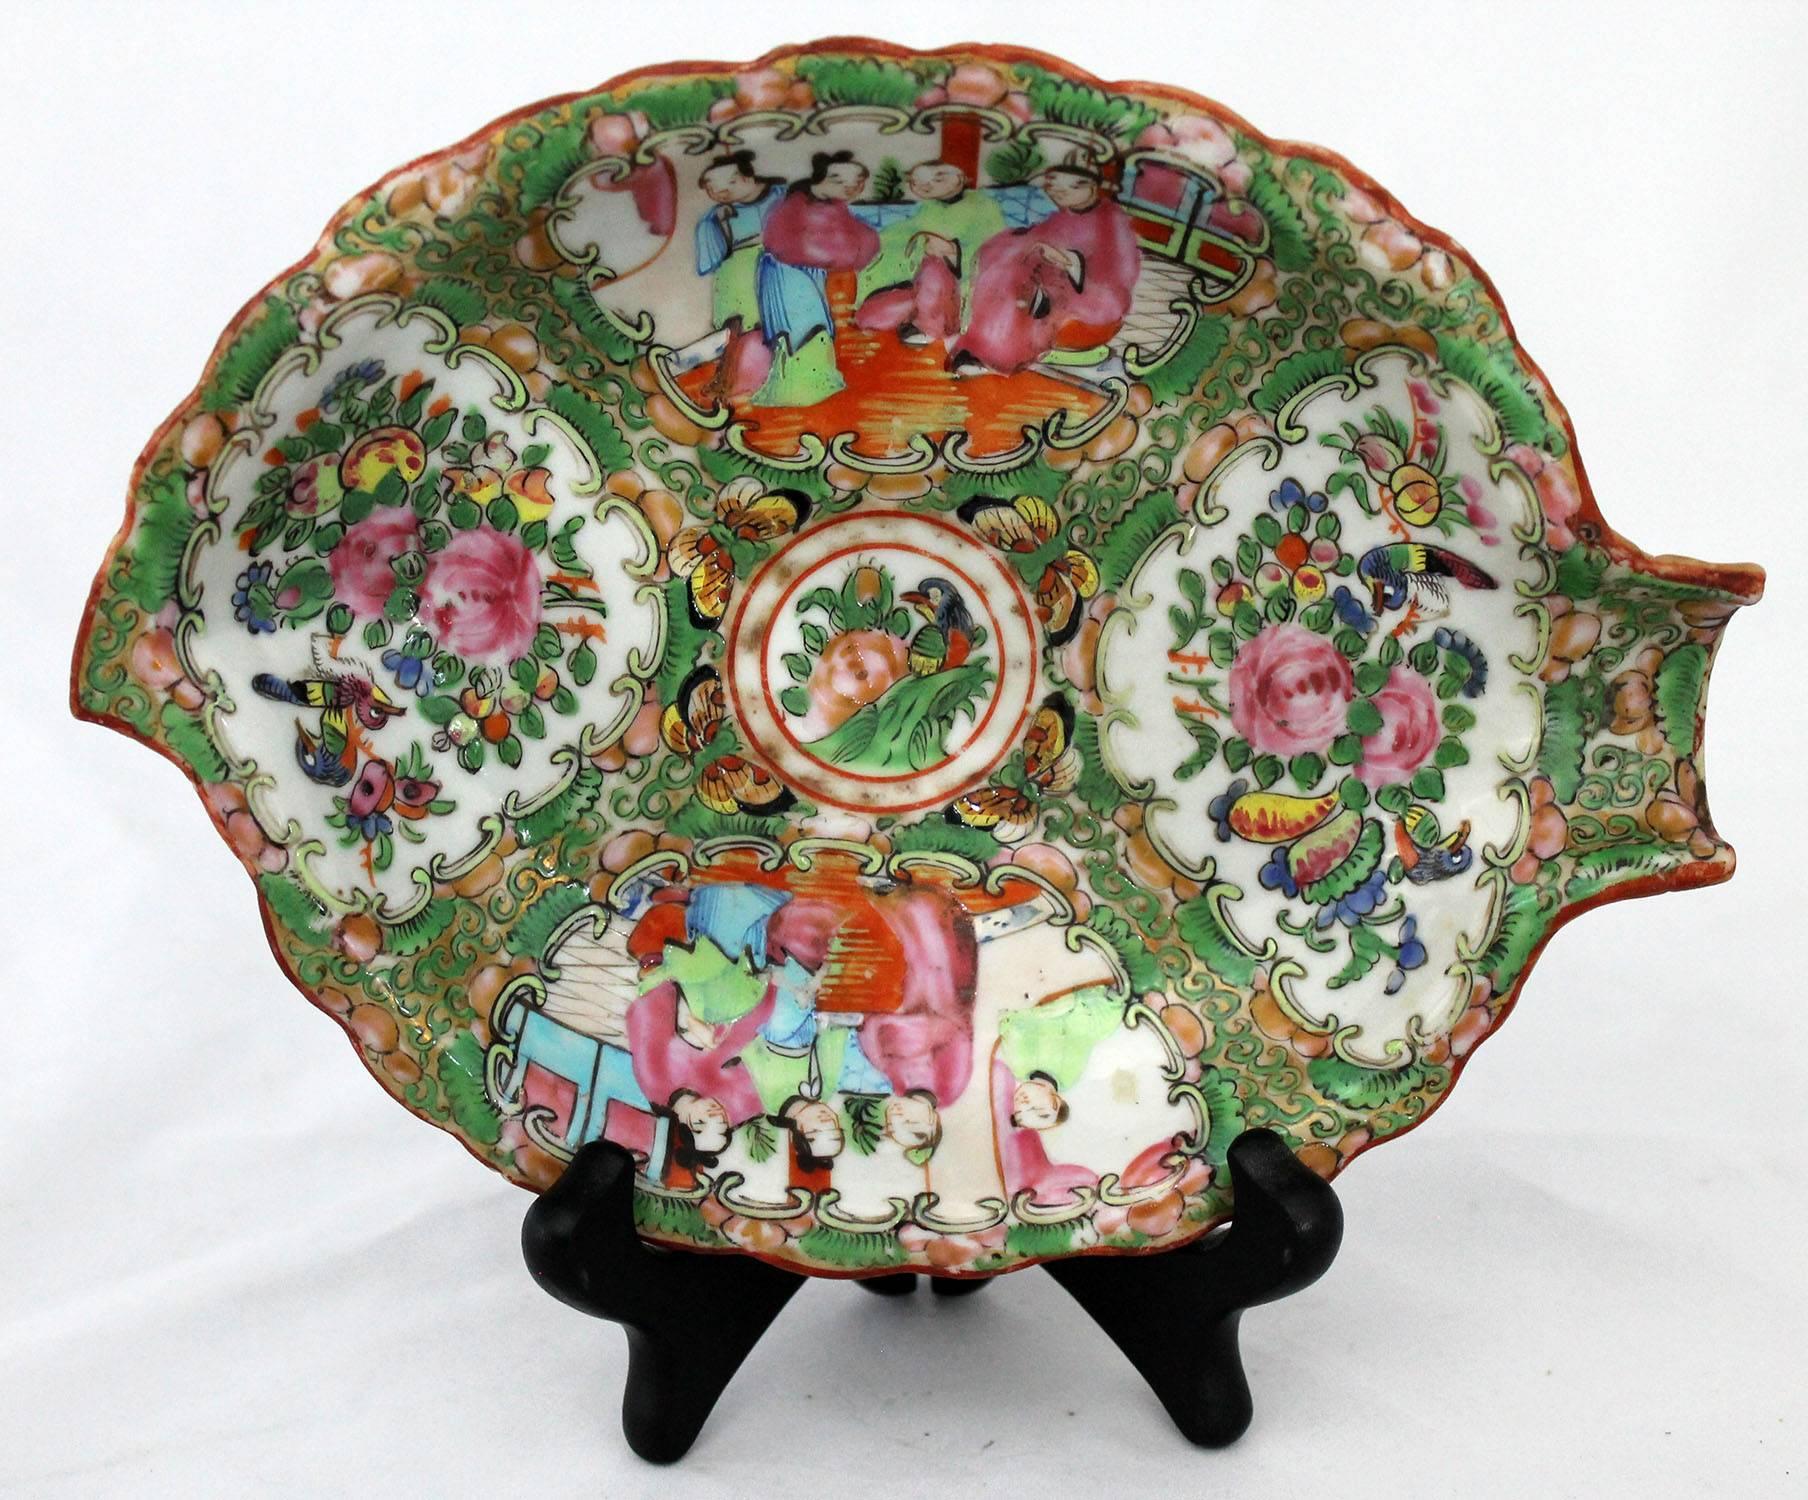 Hand-Painted Antique Chinese Qing Rose Medallion Porcelain Leaf Shaped Dish or Tray